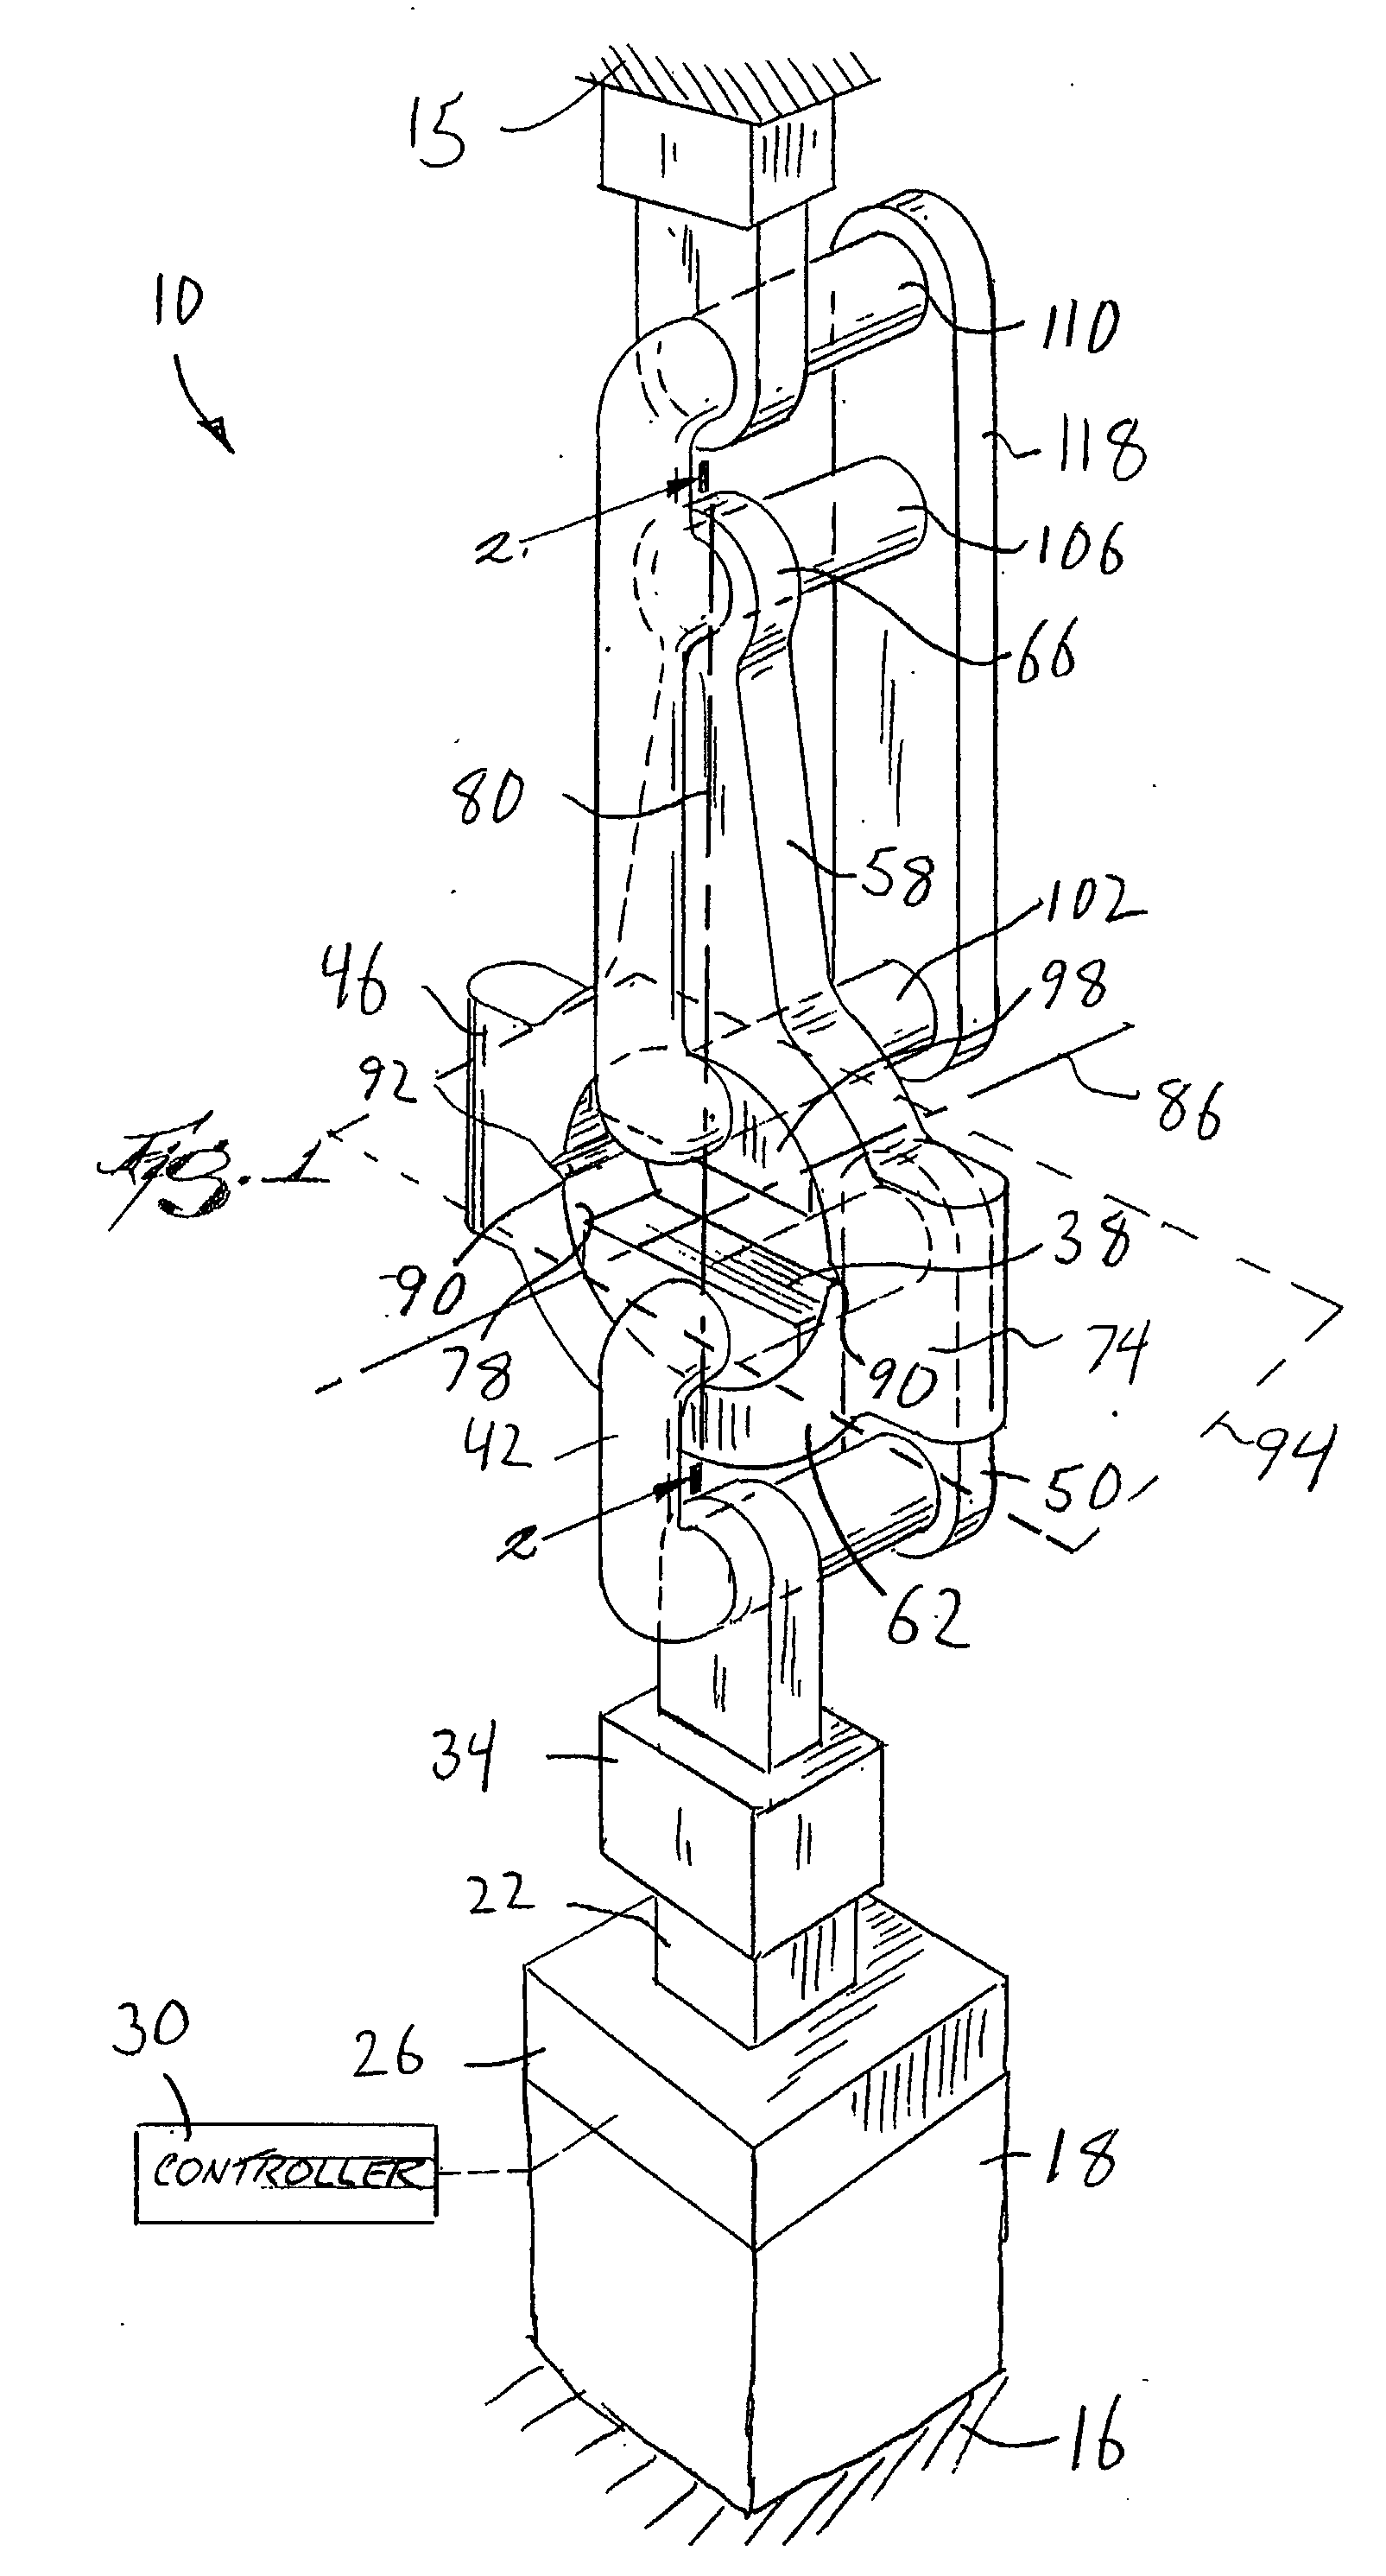 Dynamic splitting of connecting rods